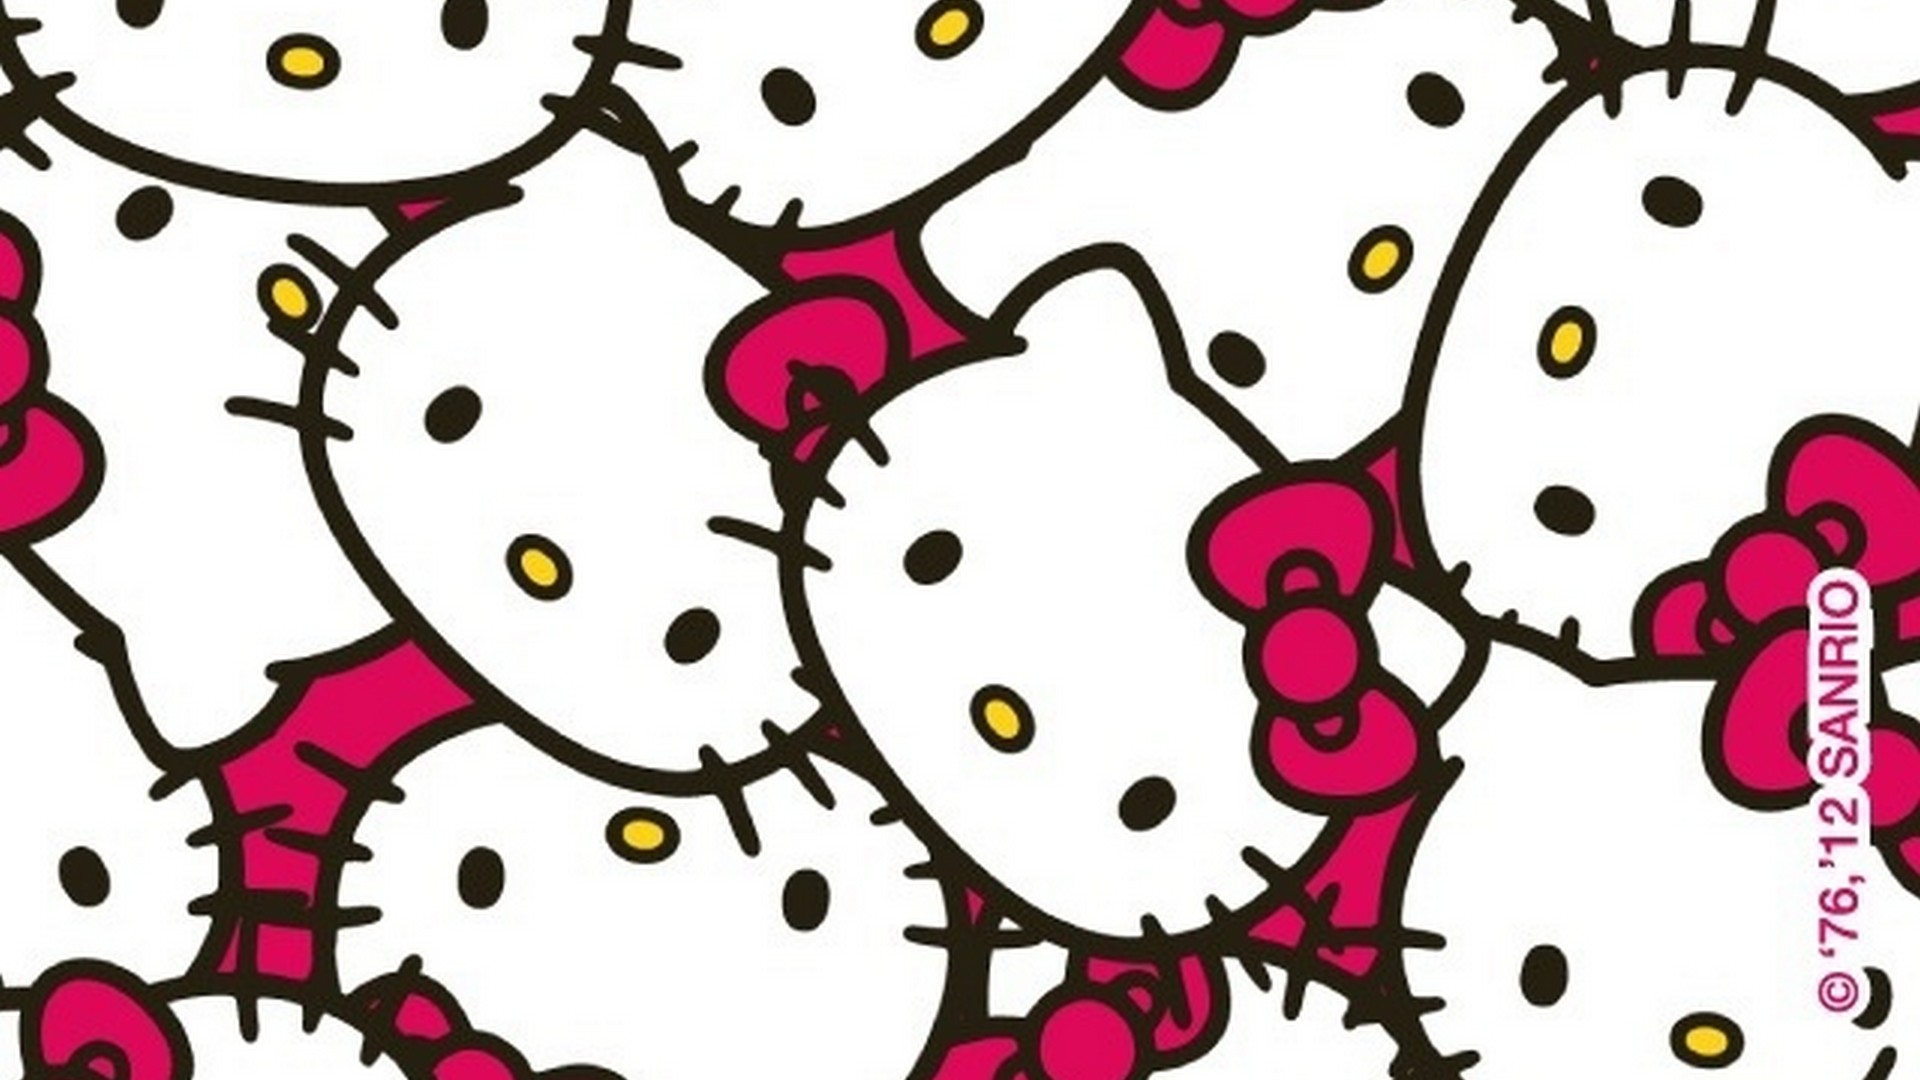 Desktop Wallpaper Hello Kitty with resolution 1920X1080 pixel. You can use this wallpaper as background for your desktop Computer Screensavers, Android or iPhone smartphones